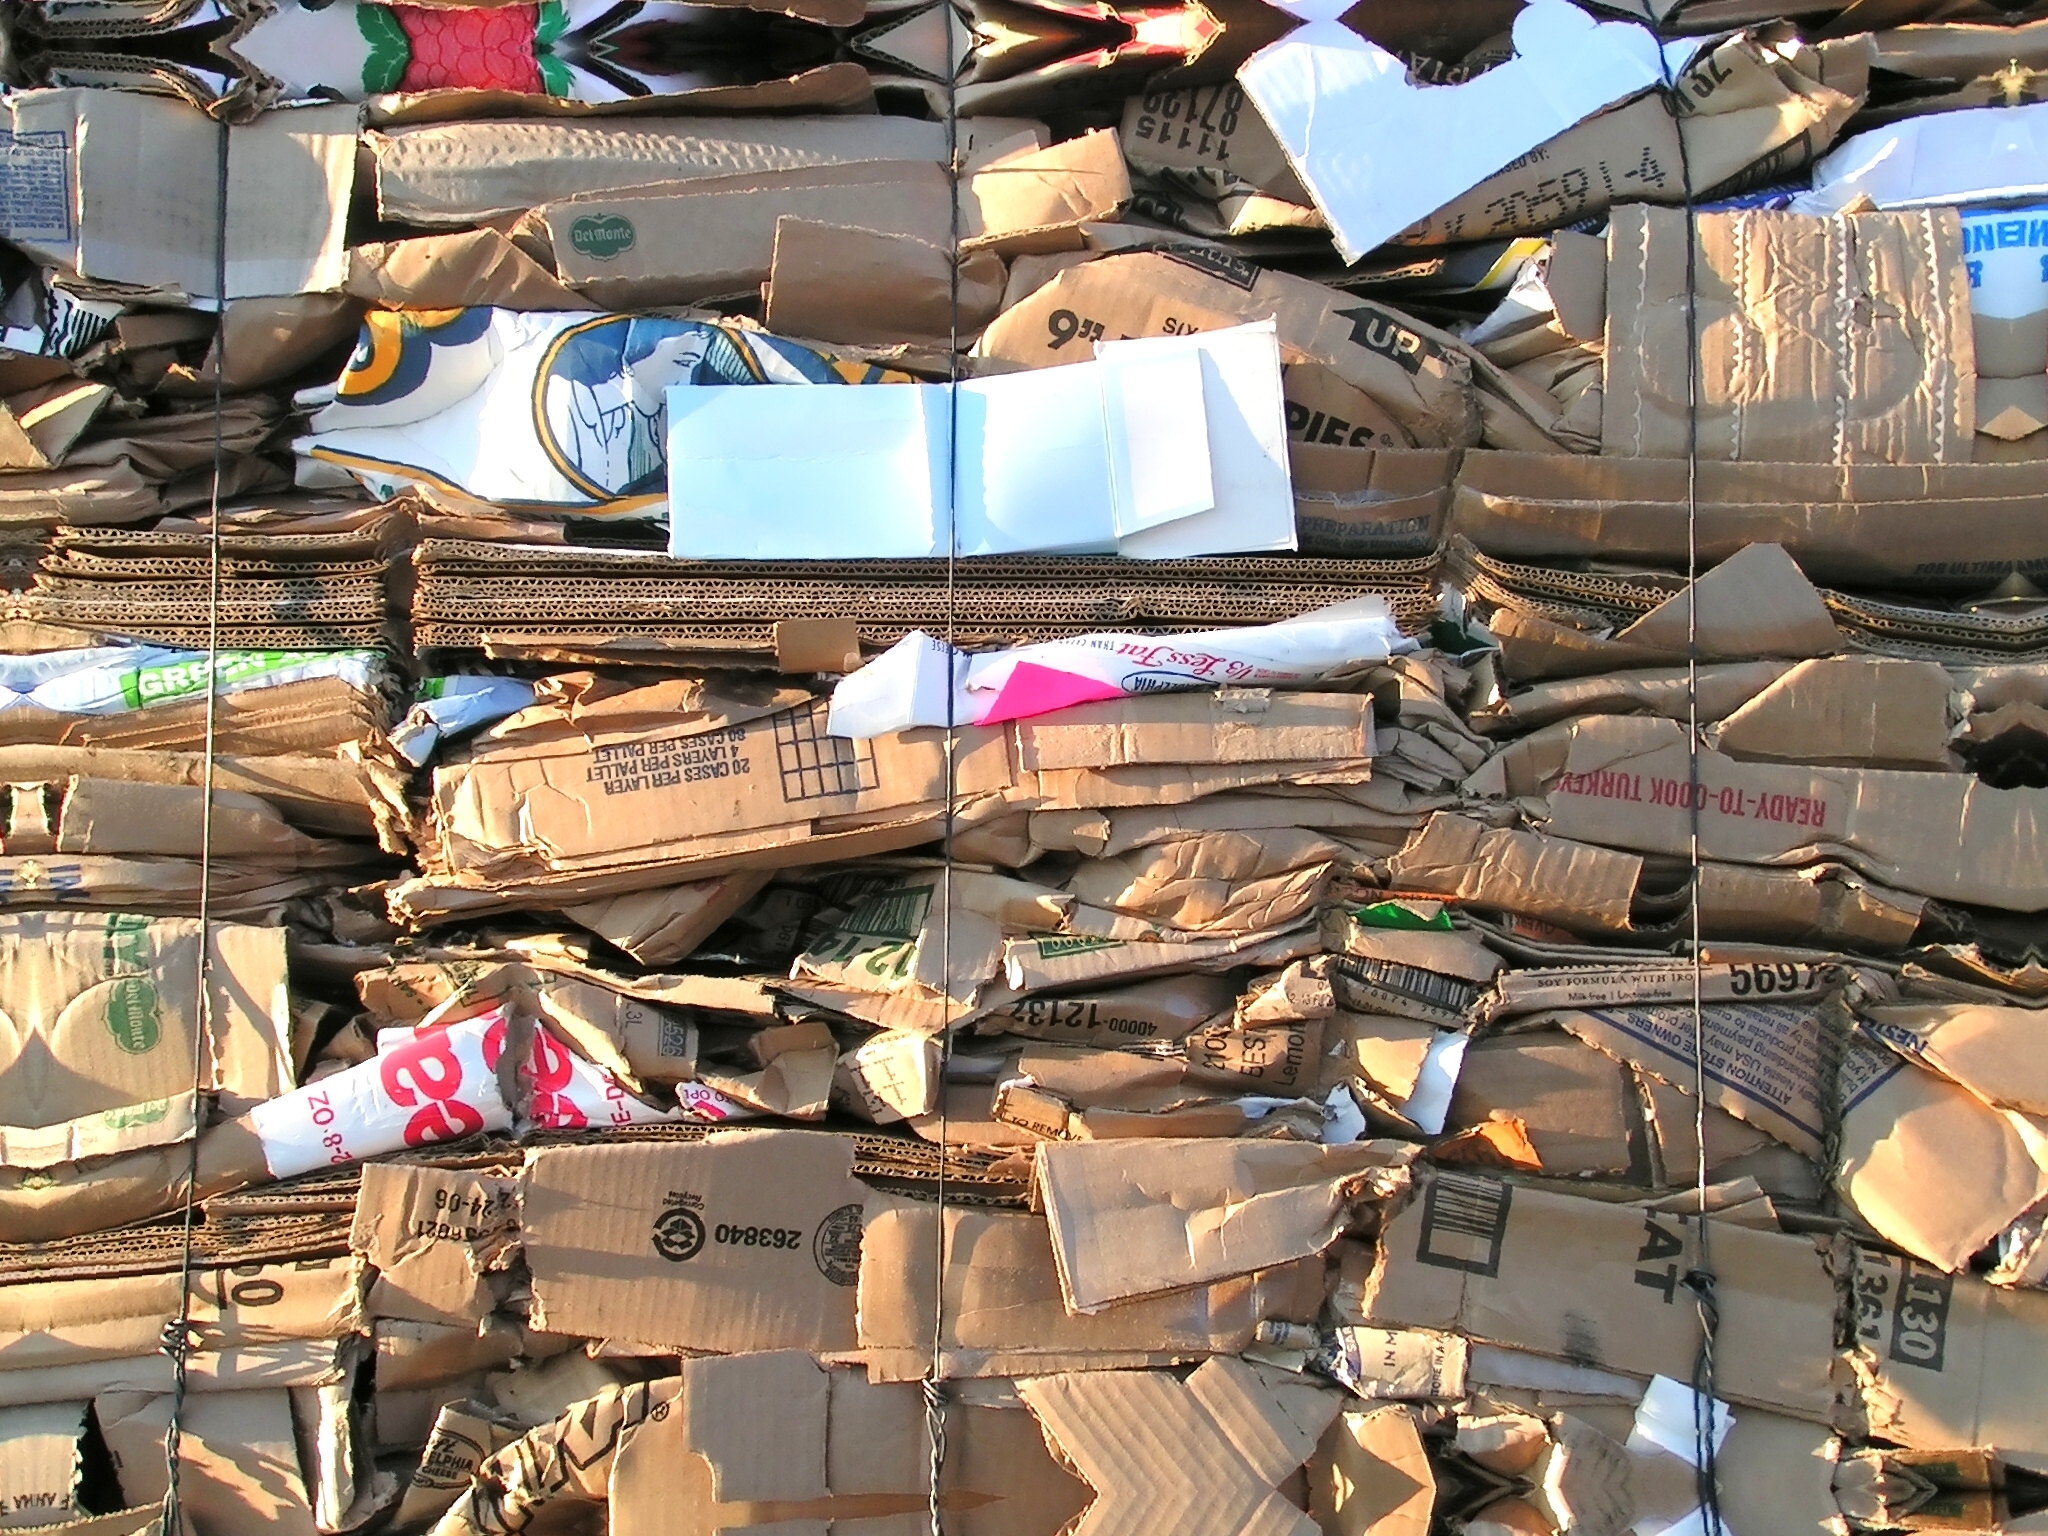 Cardboard boxes in piles for recycling